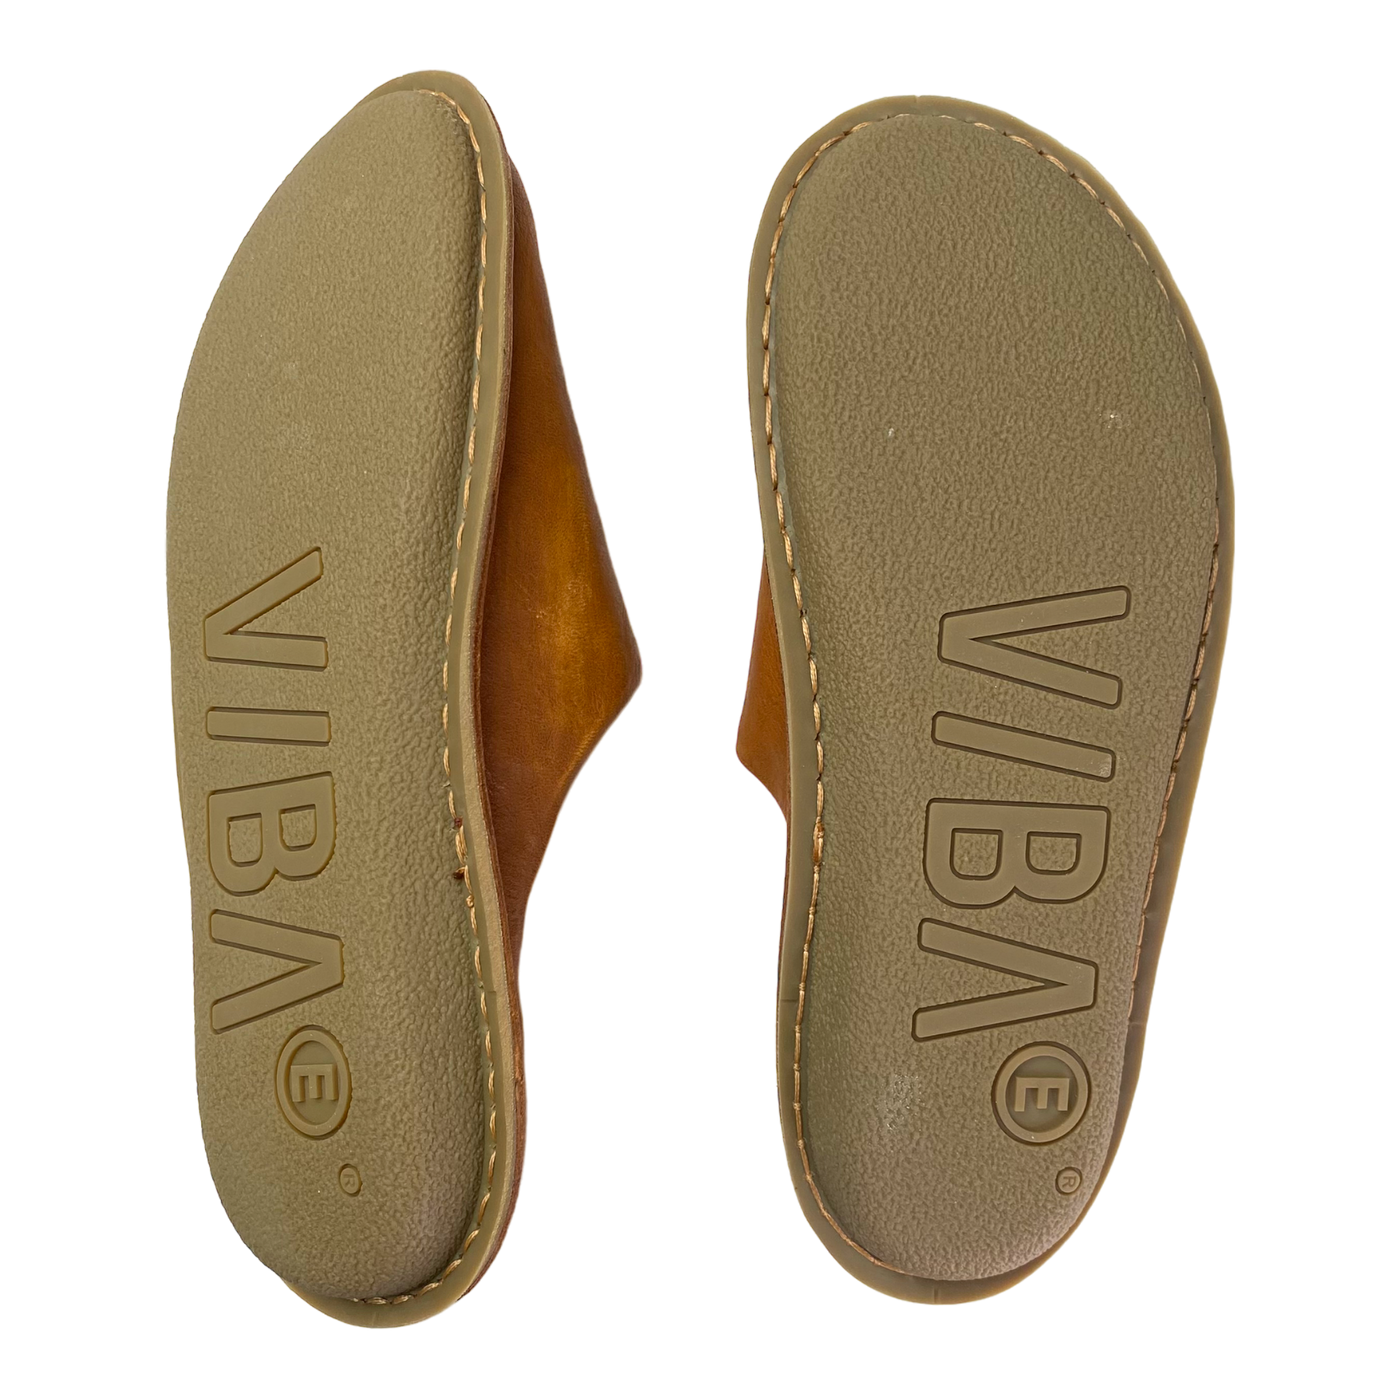 VIBAe Roma leather slippers, cognac brown | 43